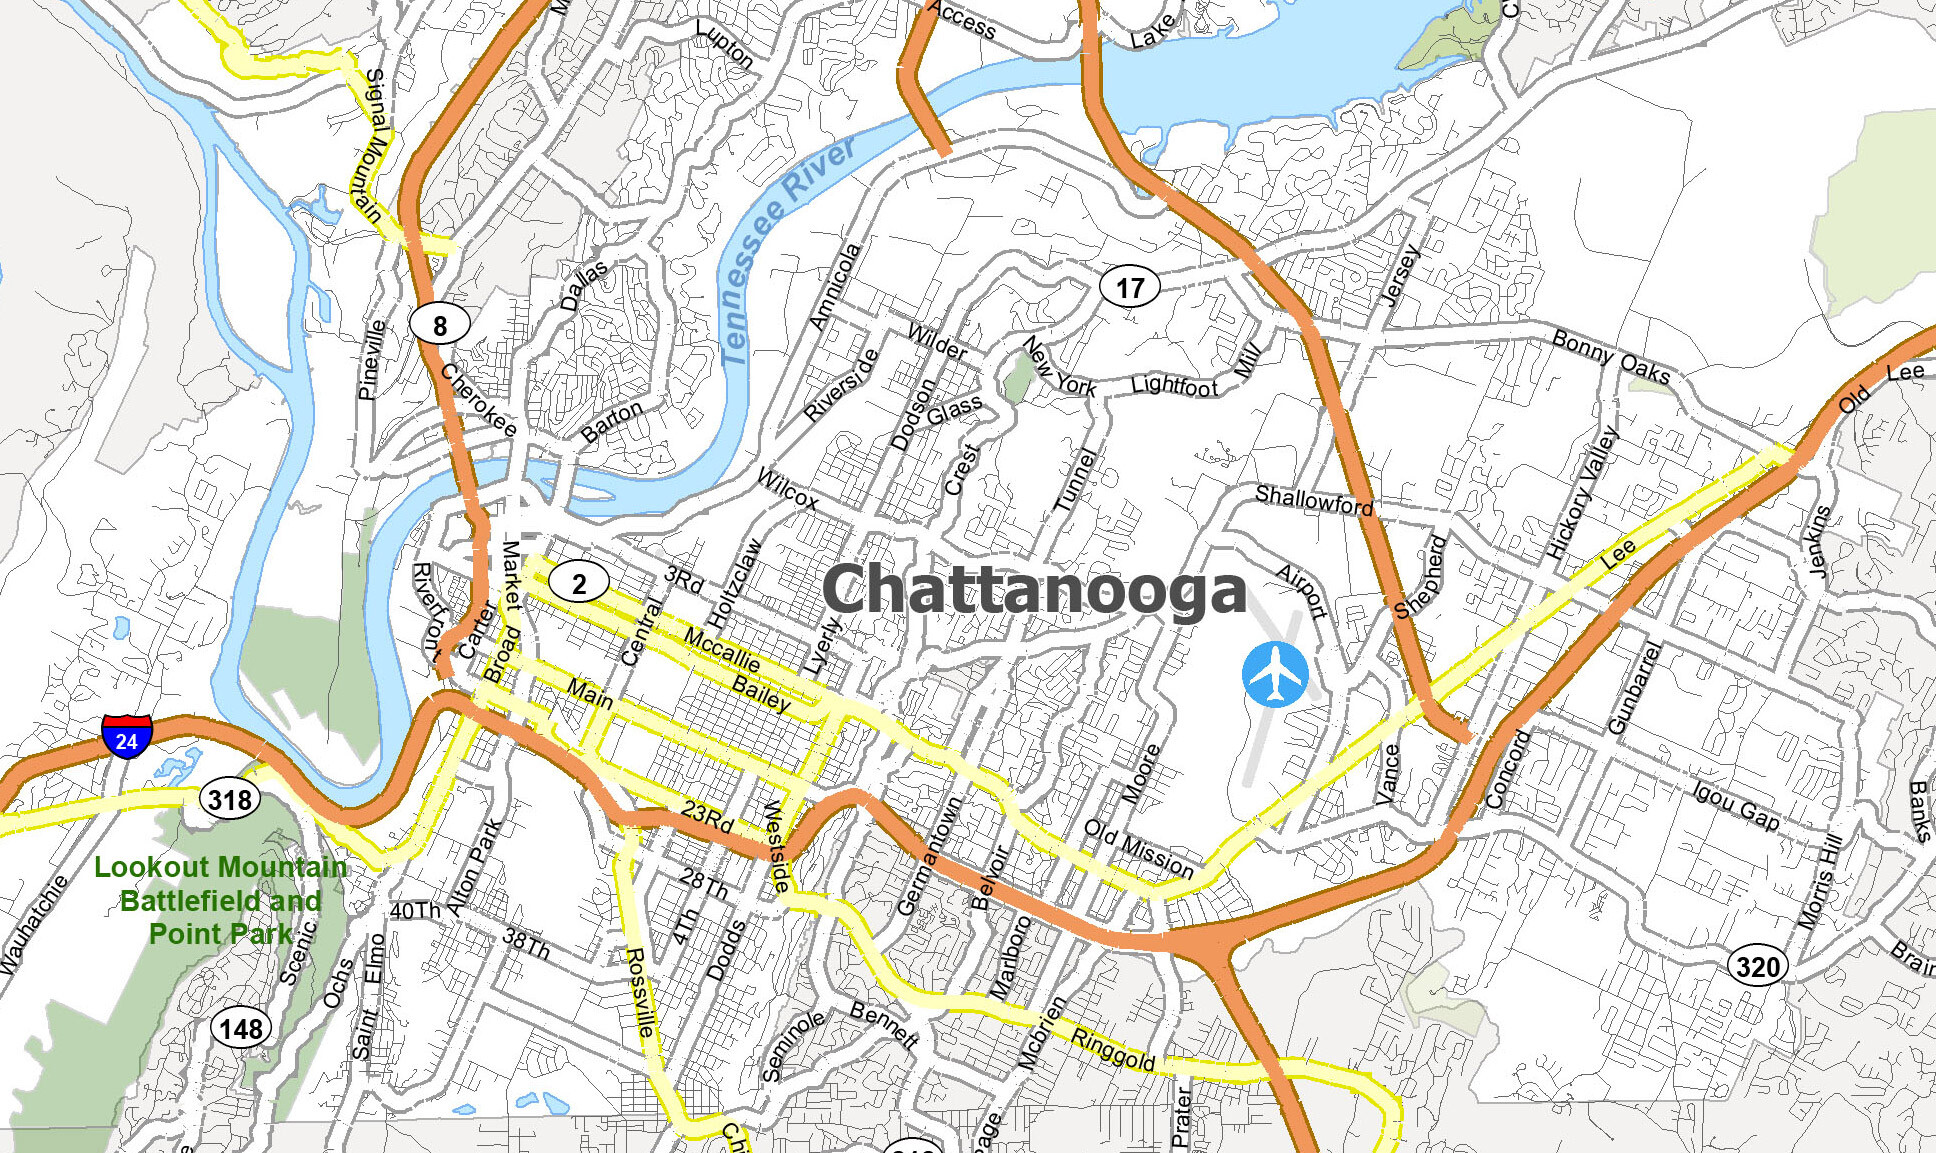 Map of Chattanooga, Tennessee - GIS Geography.